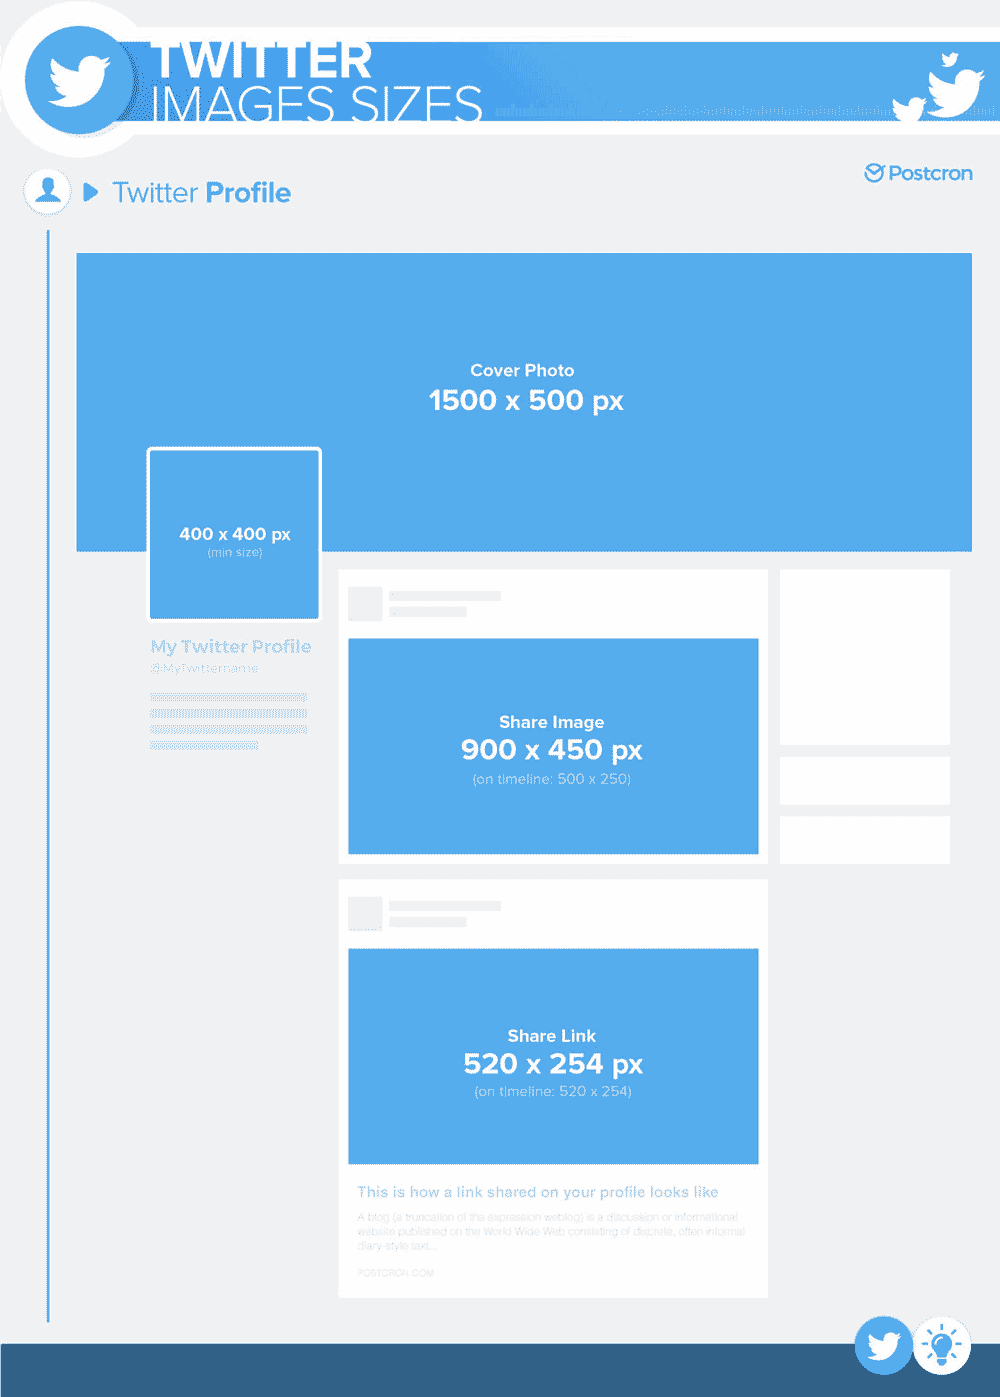 How-To-Use-Twitter-Image-Sizes